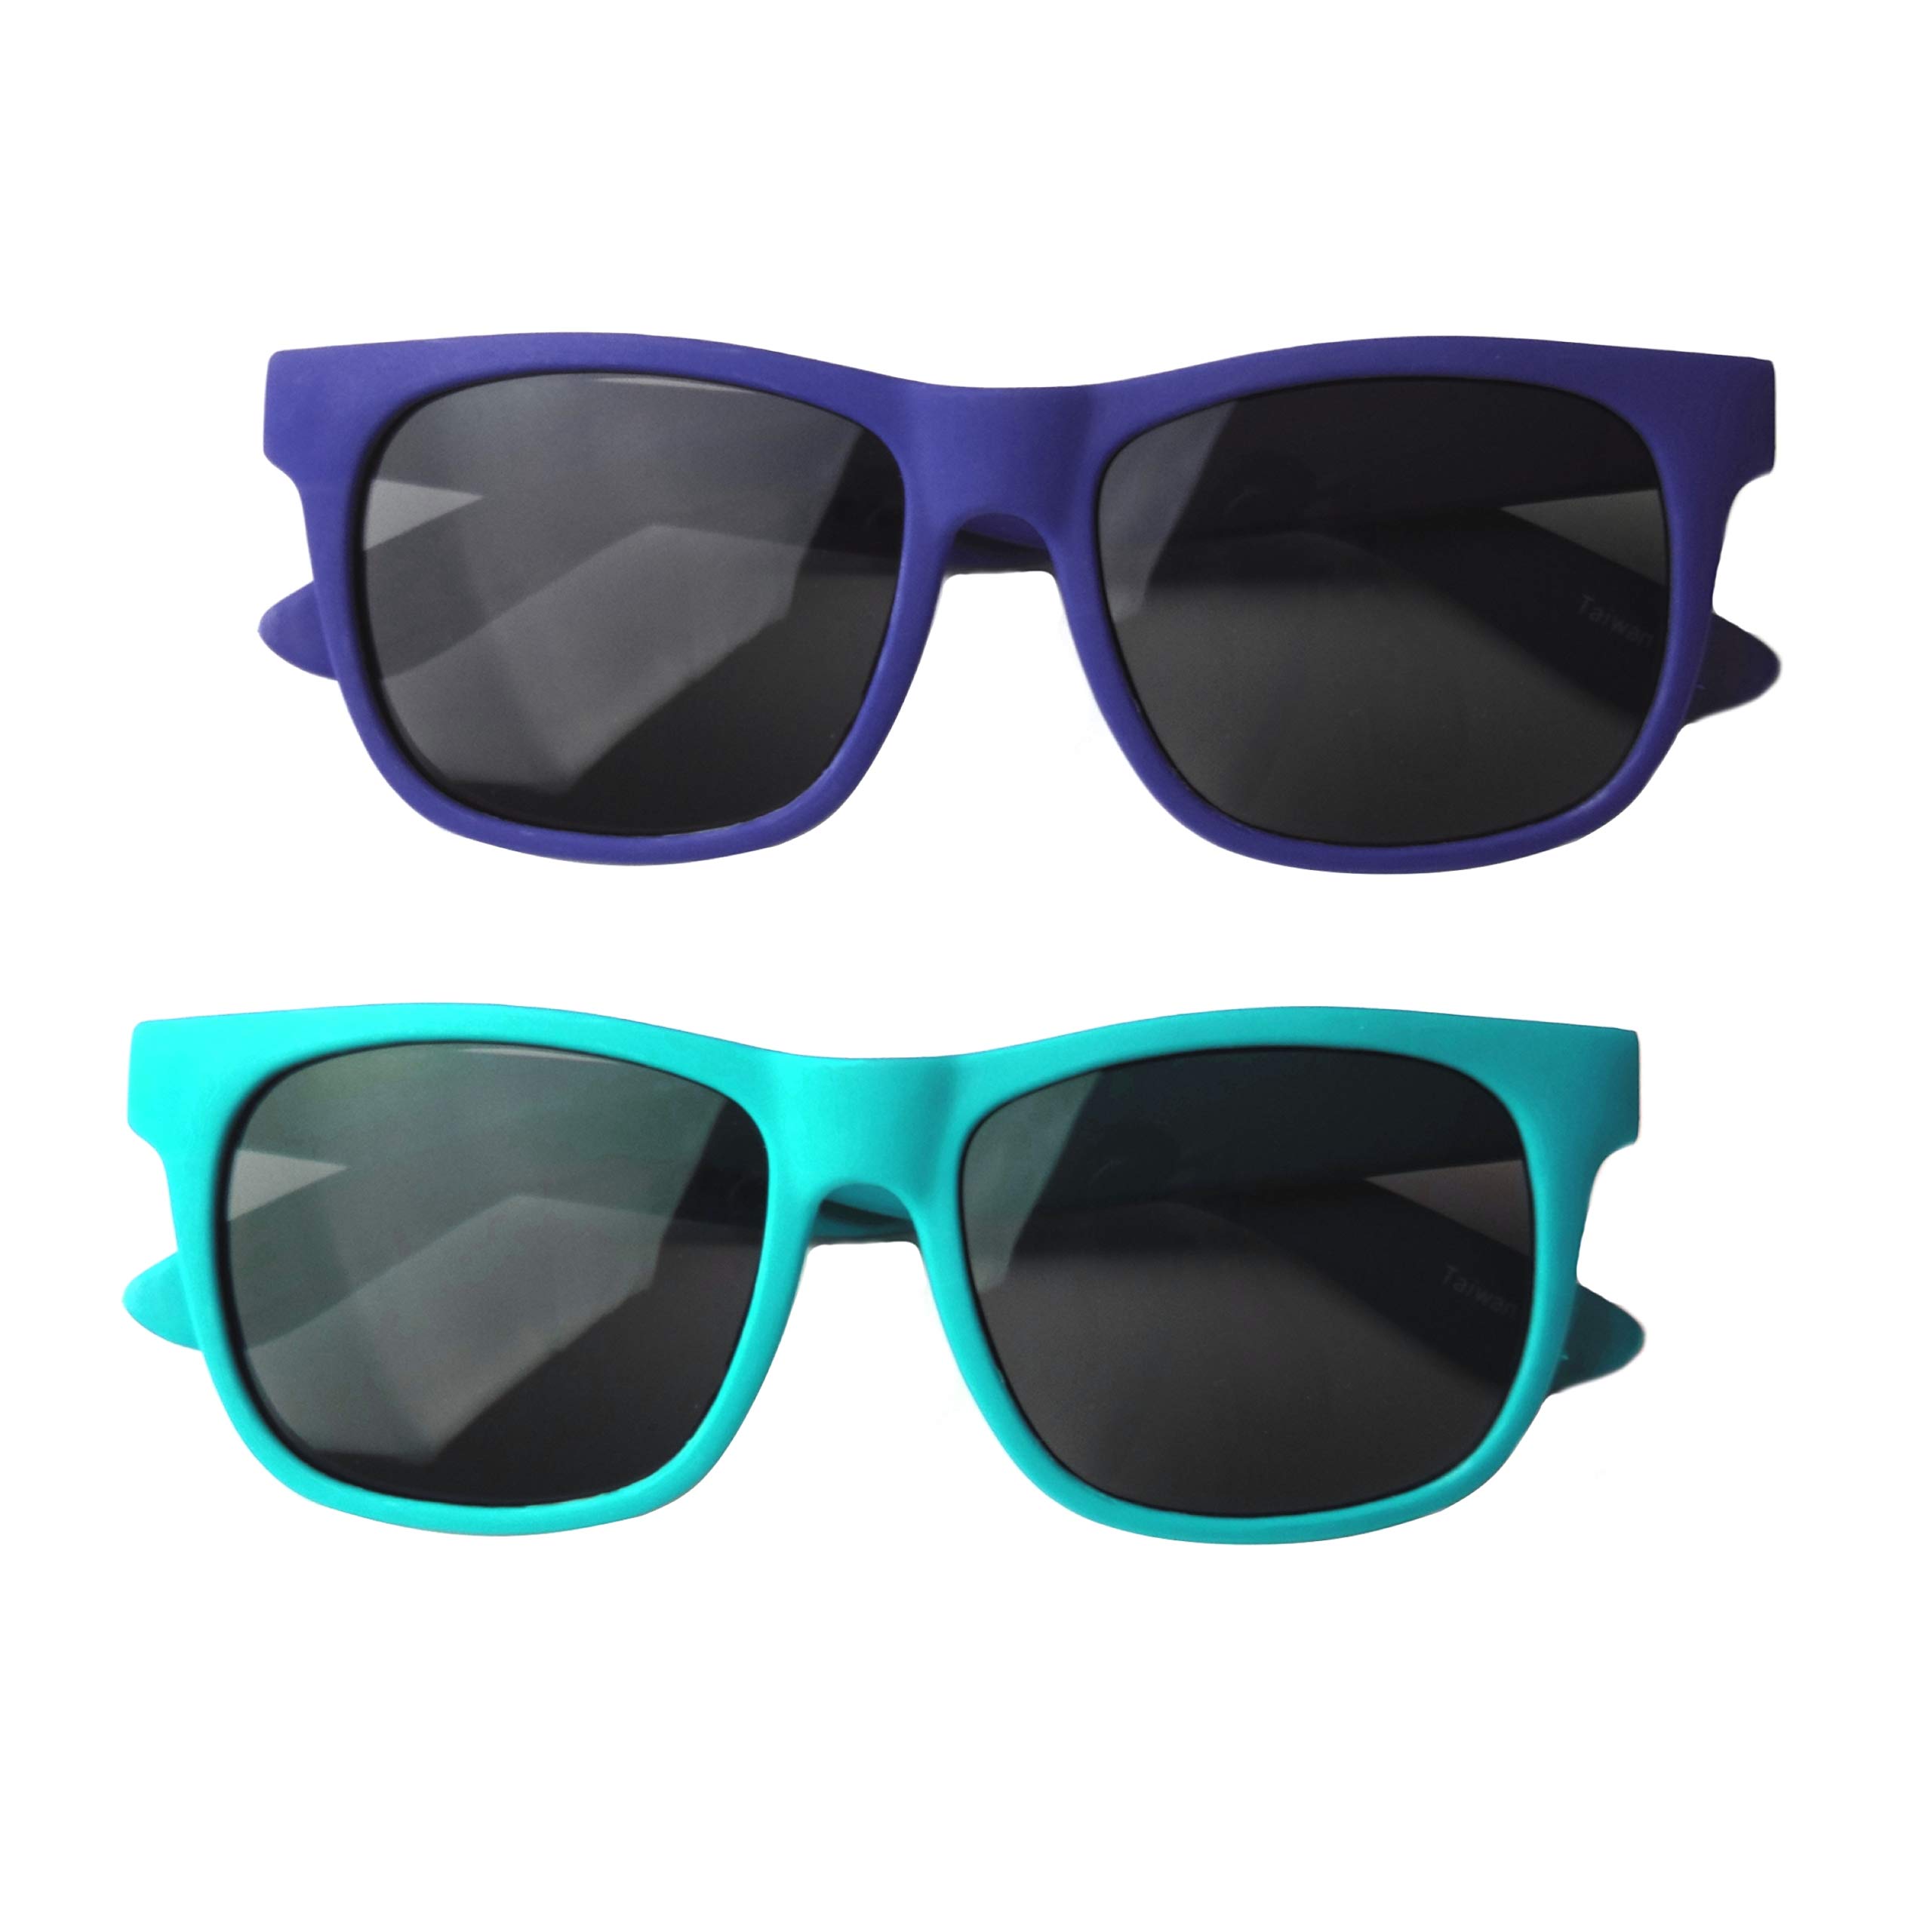 Vintage 2 Pack- Toddler's First Sunglasses for Ages 2-4 Years